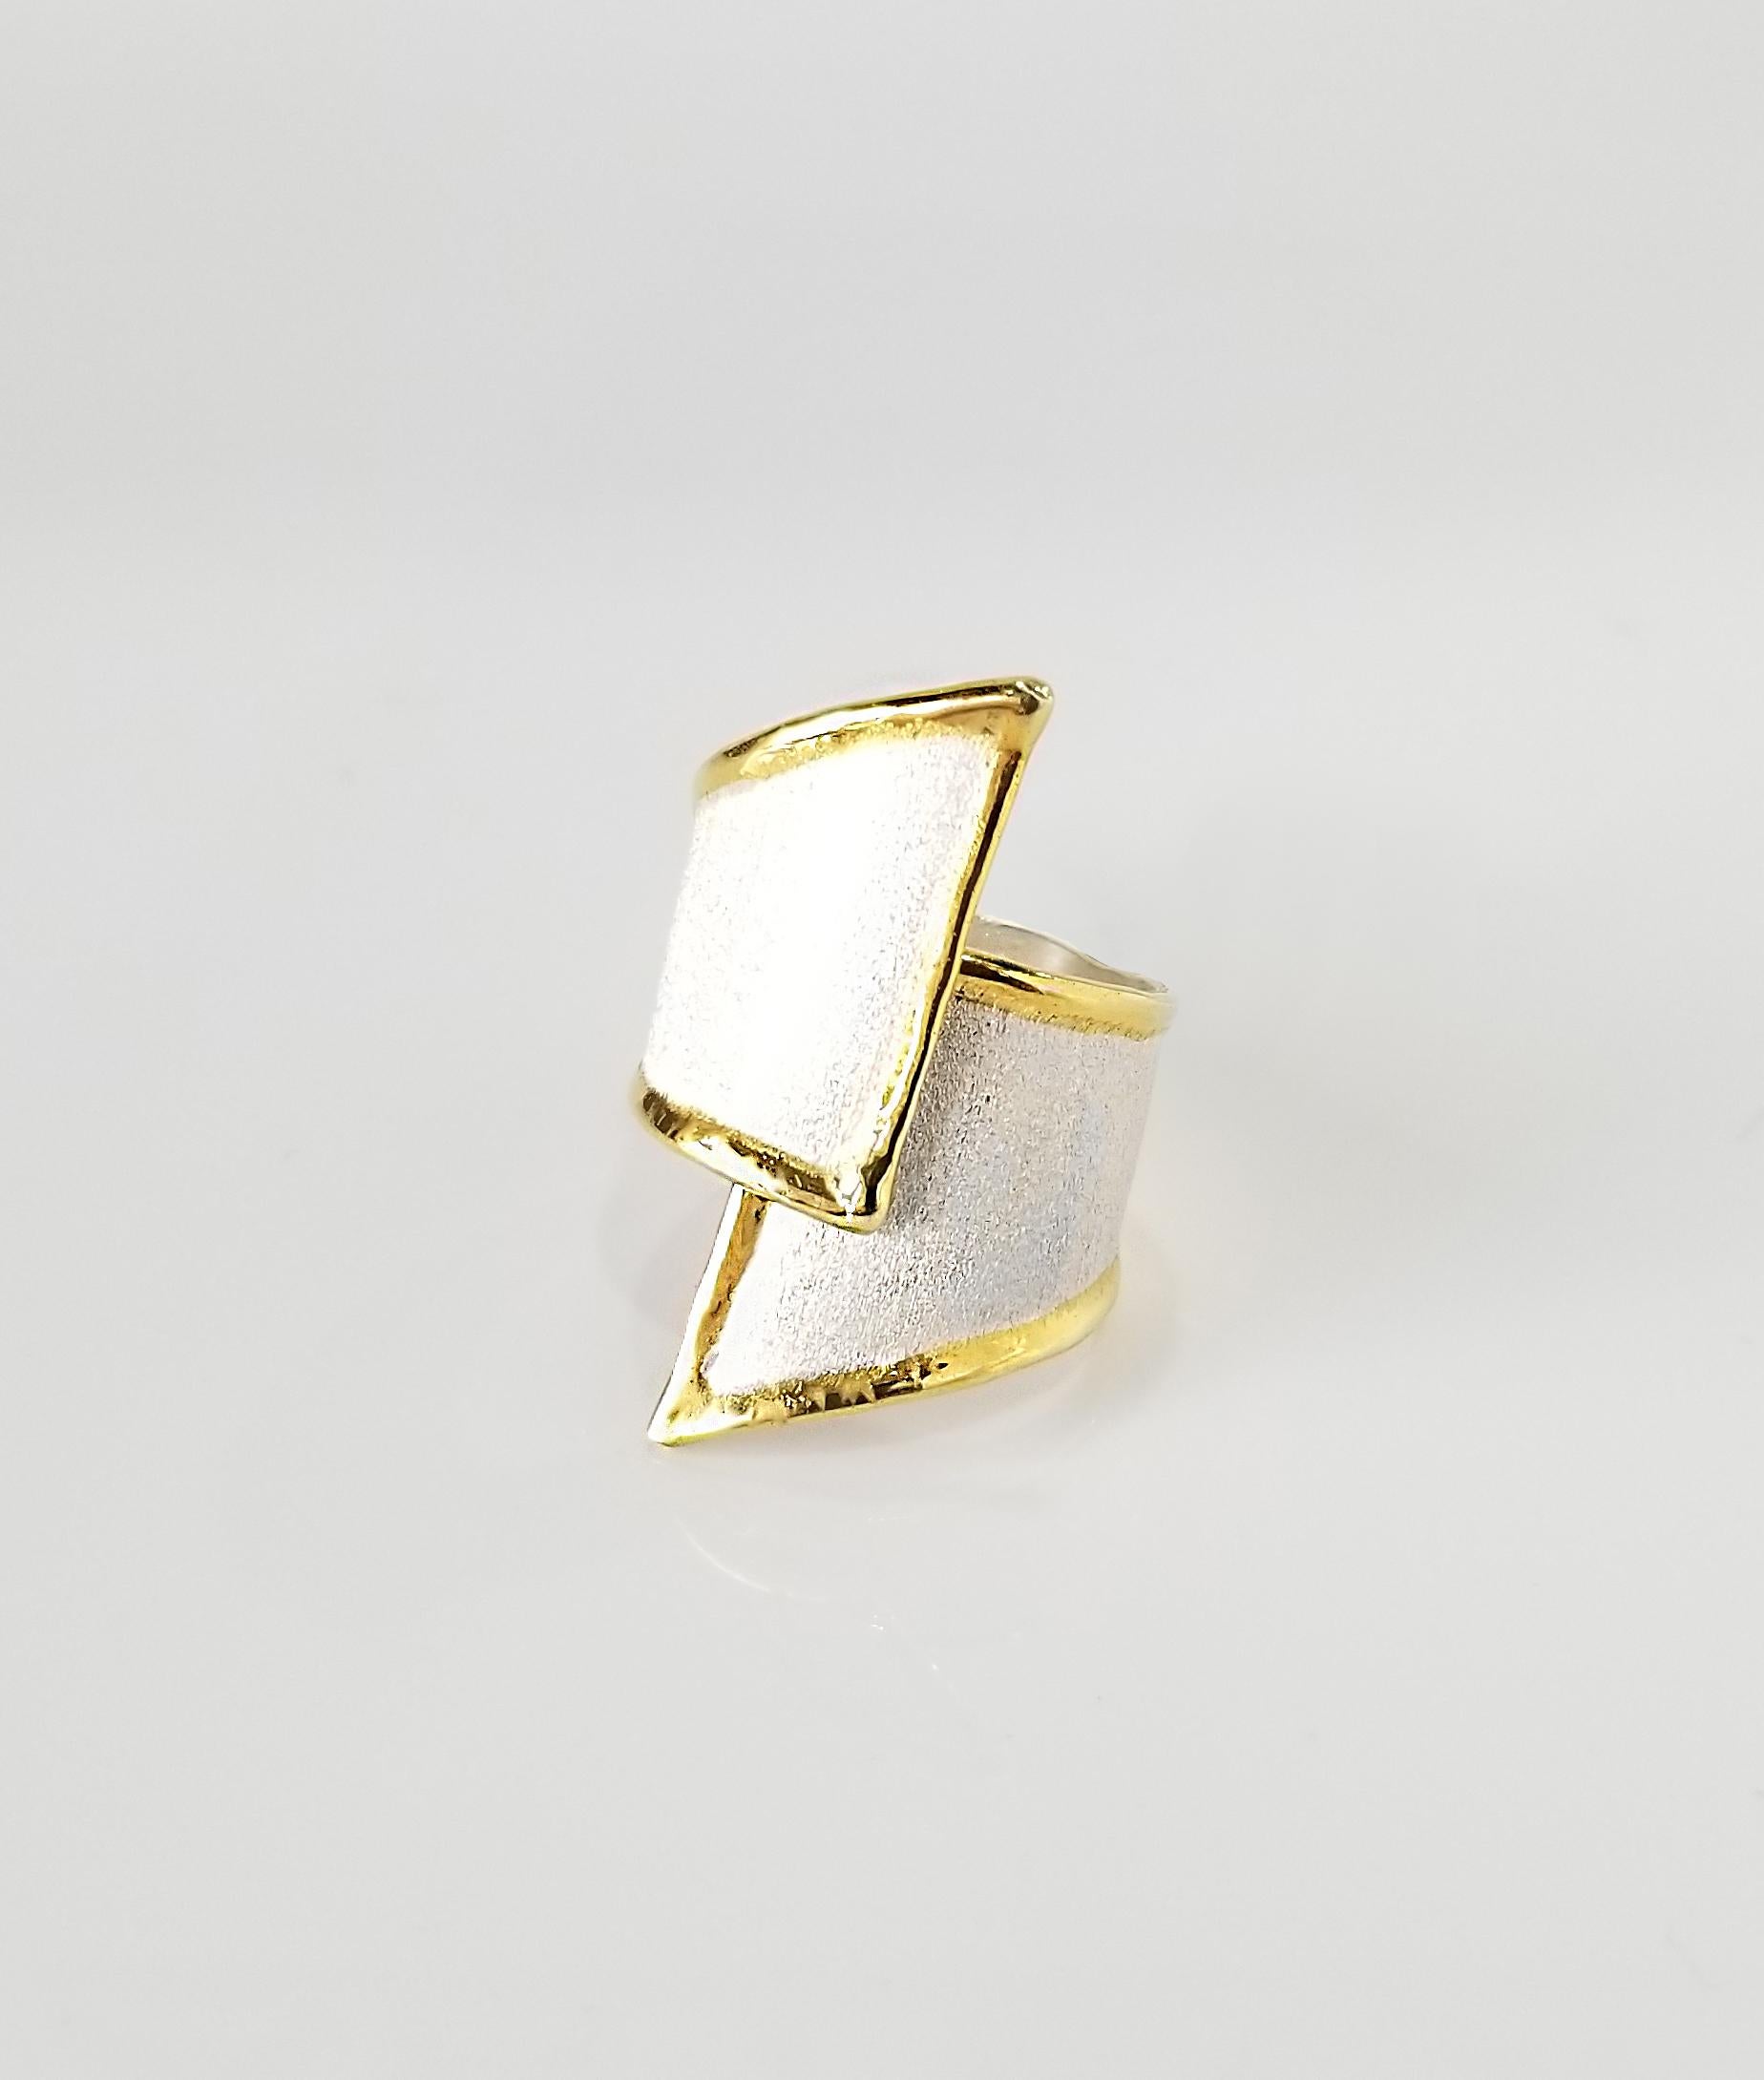 Presenting Yianni Creations Midas Collection handmade artisan ring from fine silver 950 purity plated with palladium to resist from elements. Liquid edges are decorated with a thick overlay of 24 Karat Yellow Gold. Ring adjusts in size by its